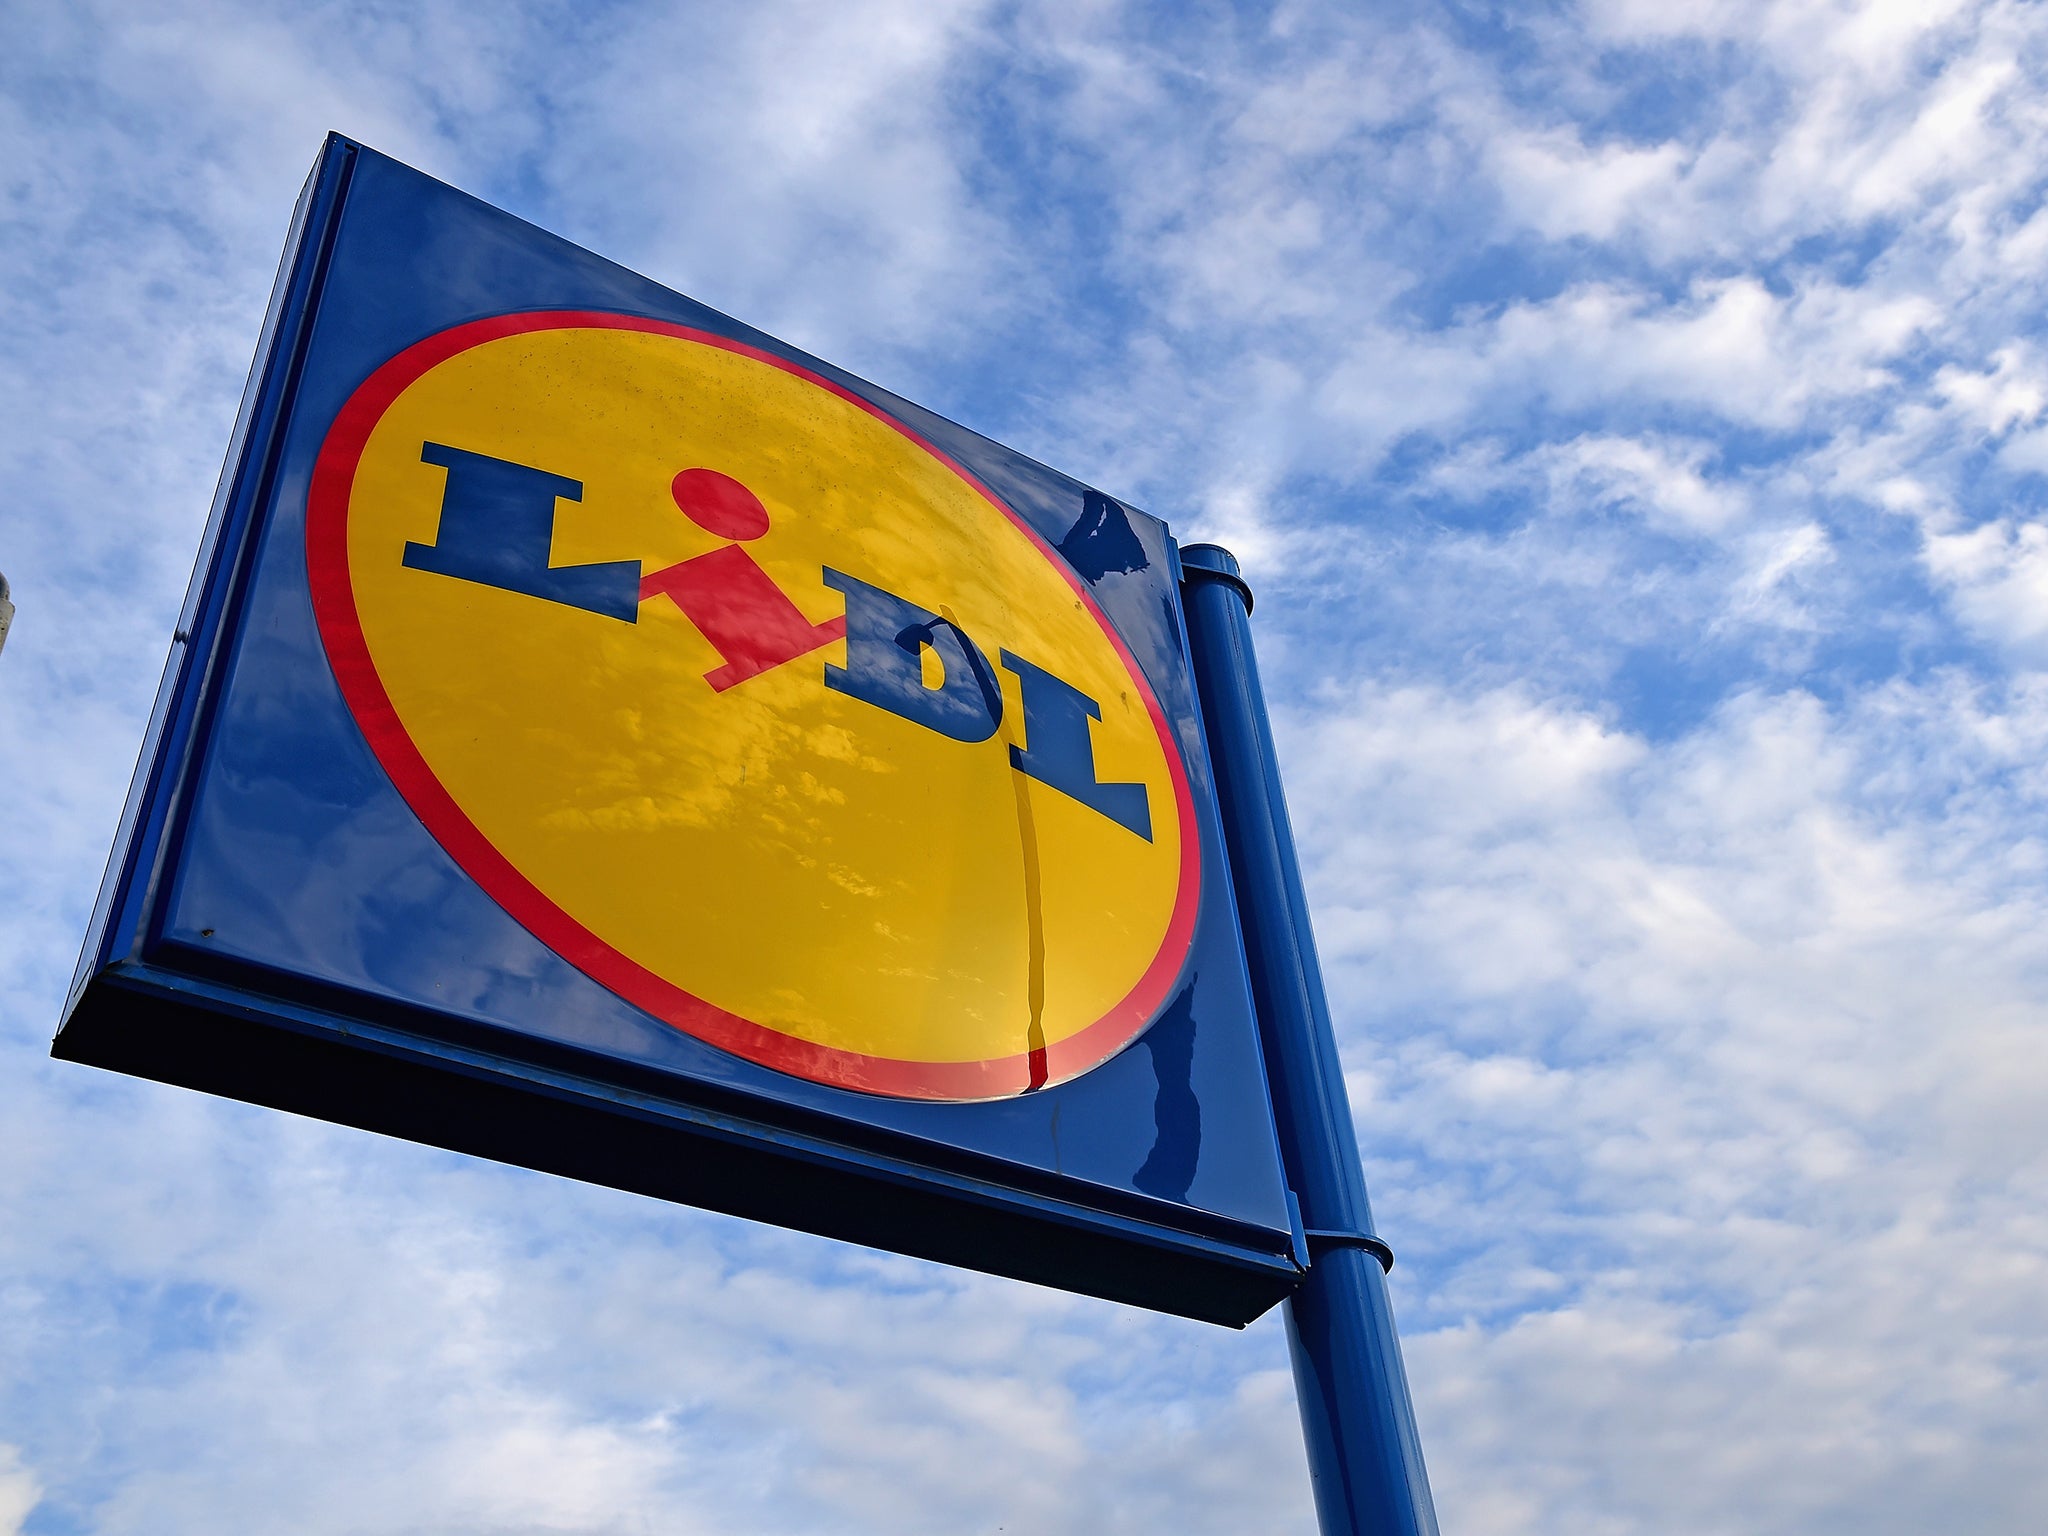 Lidl has done itself some great PR this week